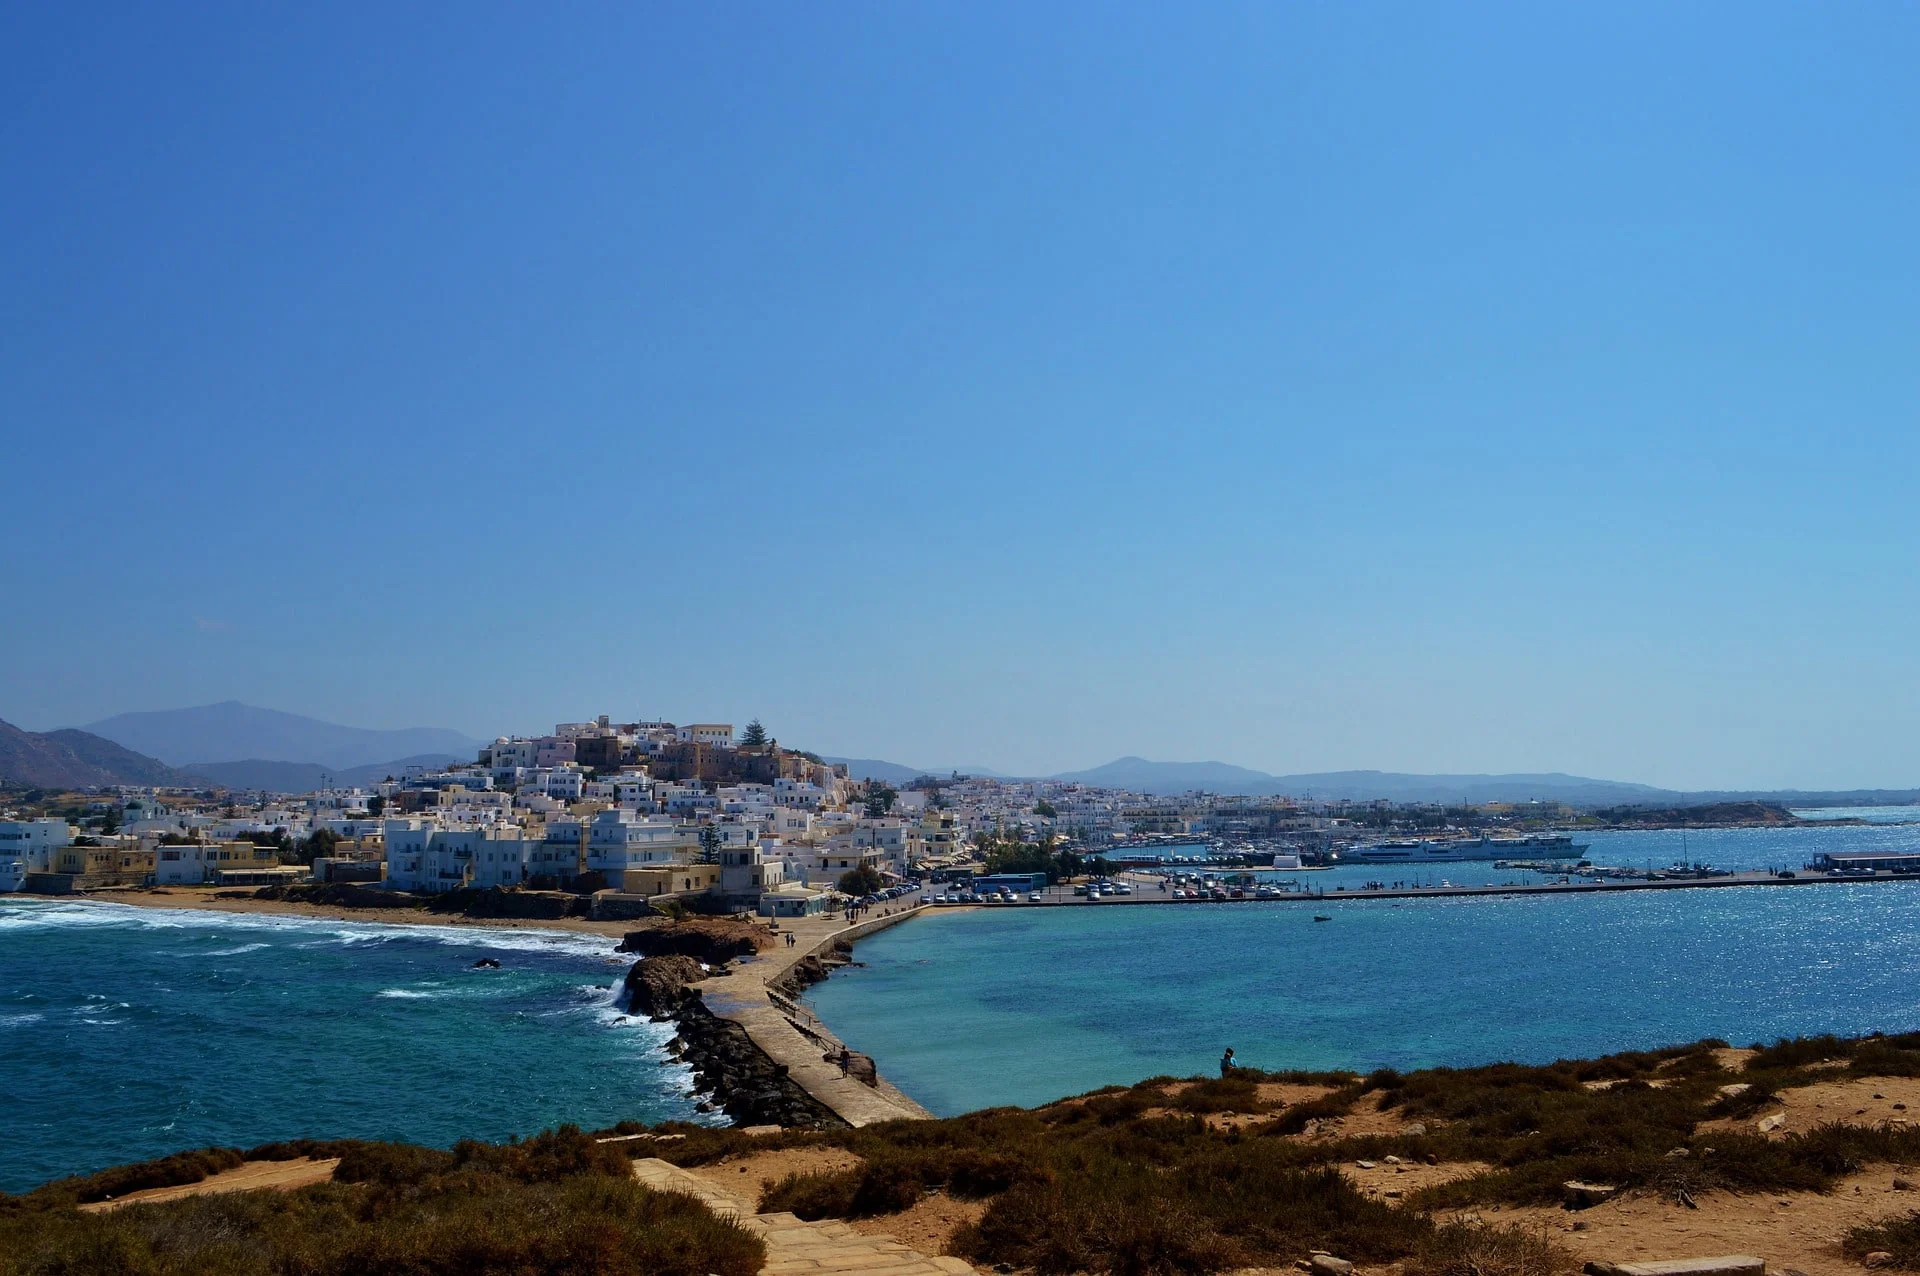 Things To Do In Naxos - 10 Amazing Places You Need To Explore - Portara - Temple of Apollo